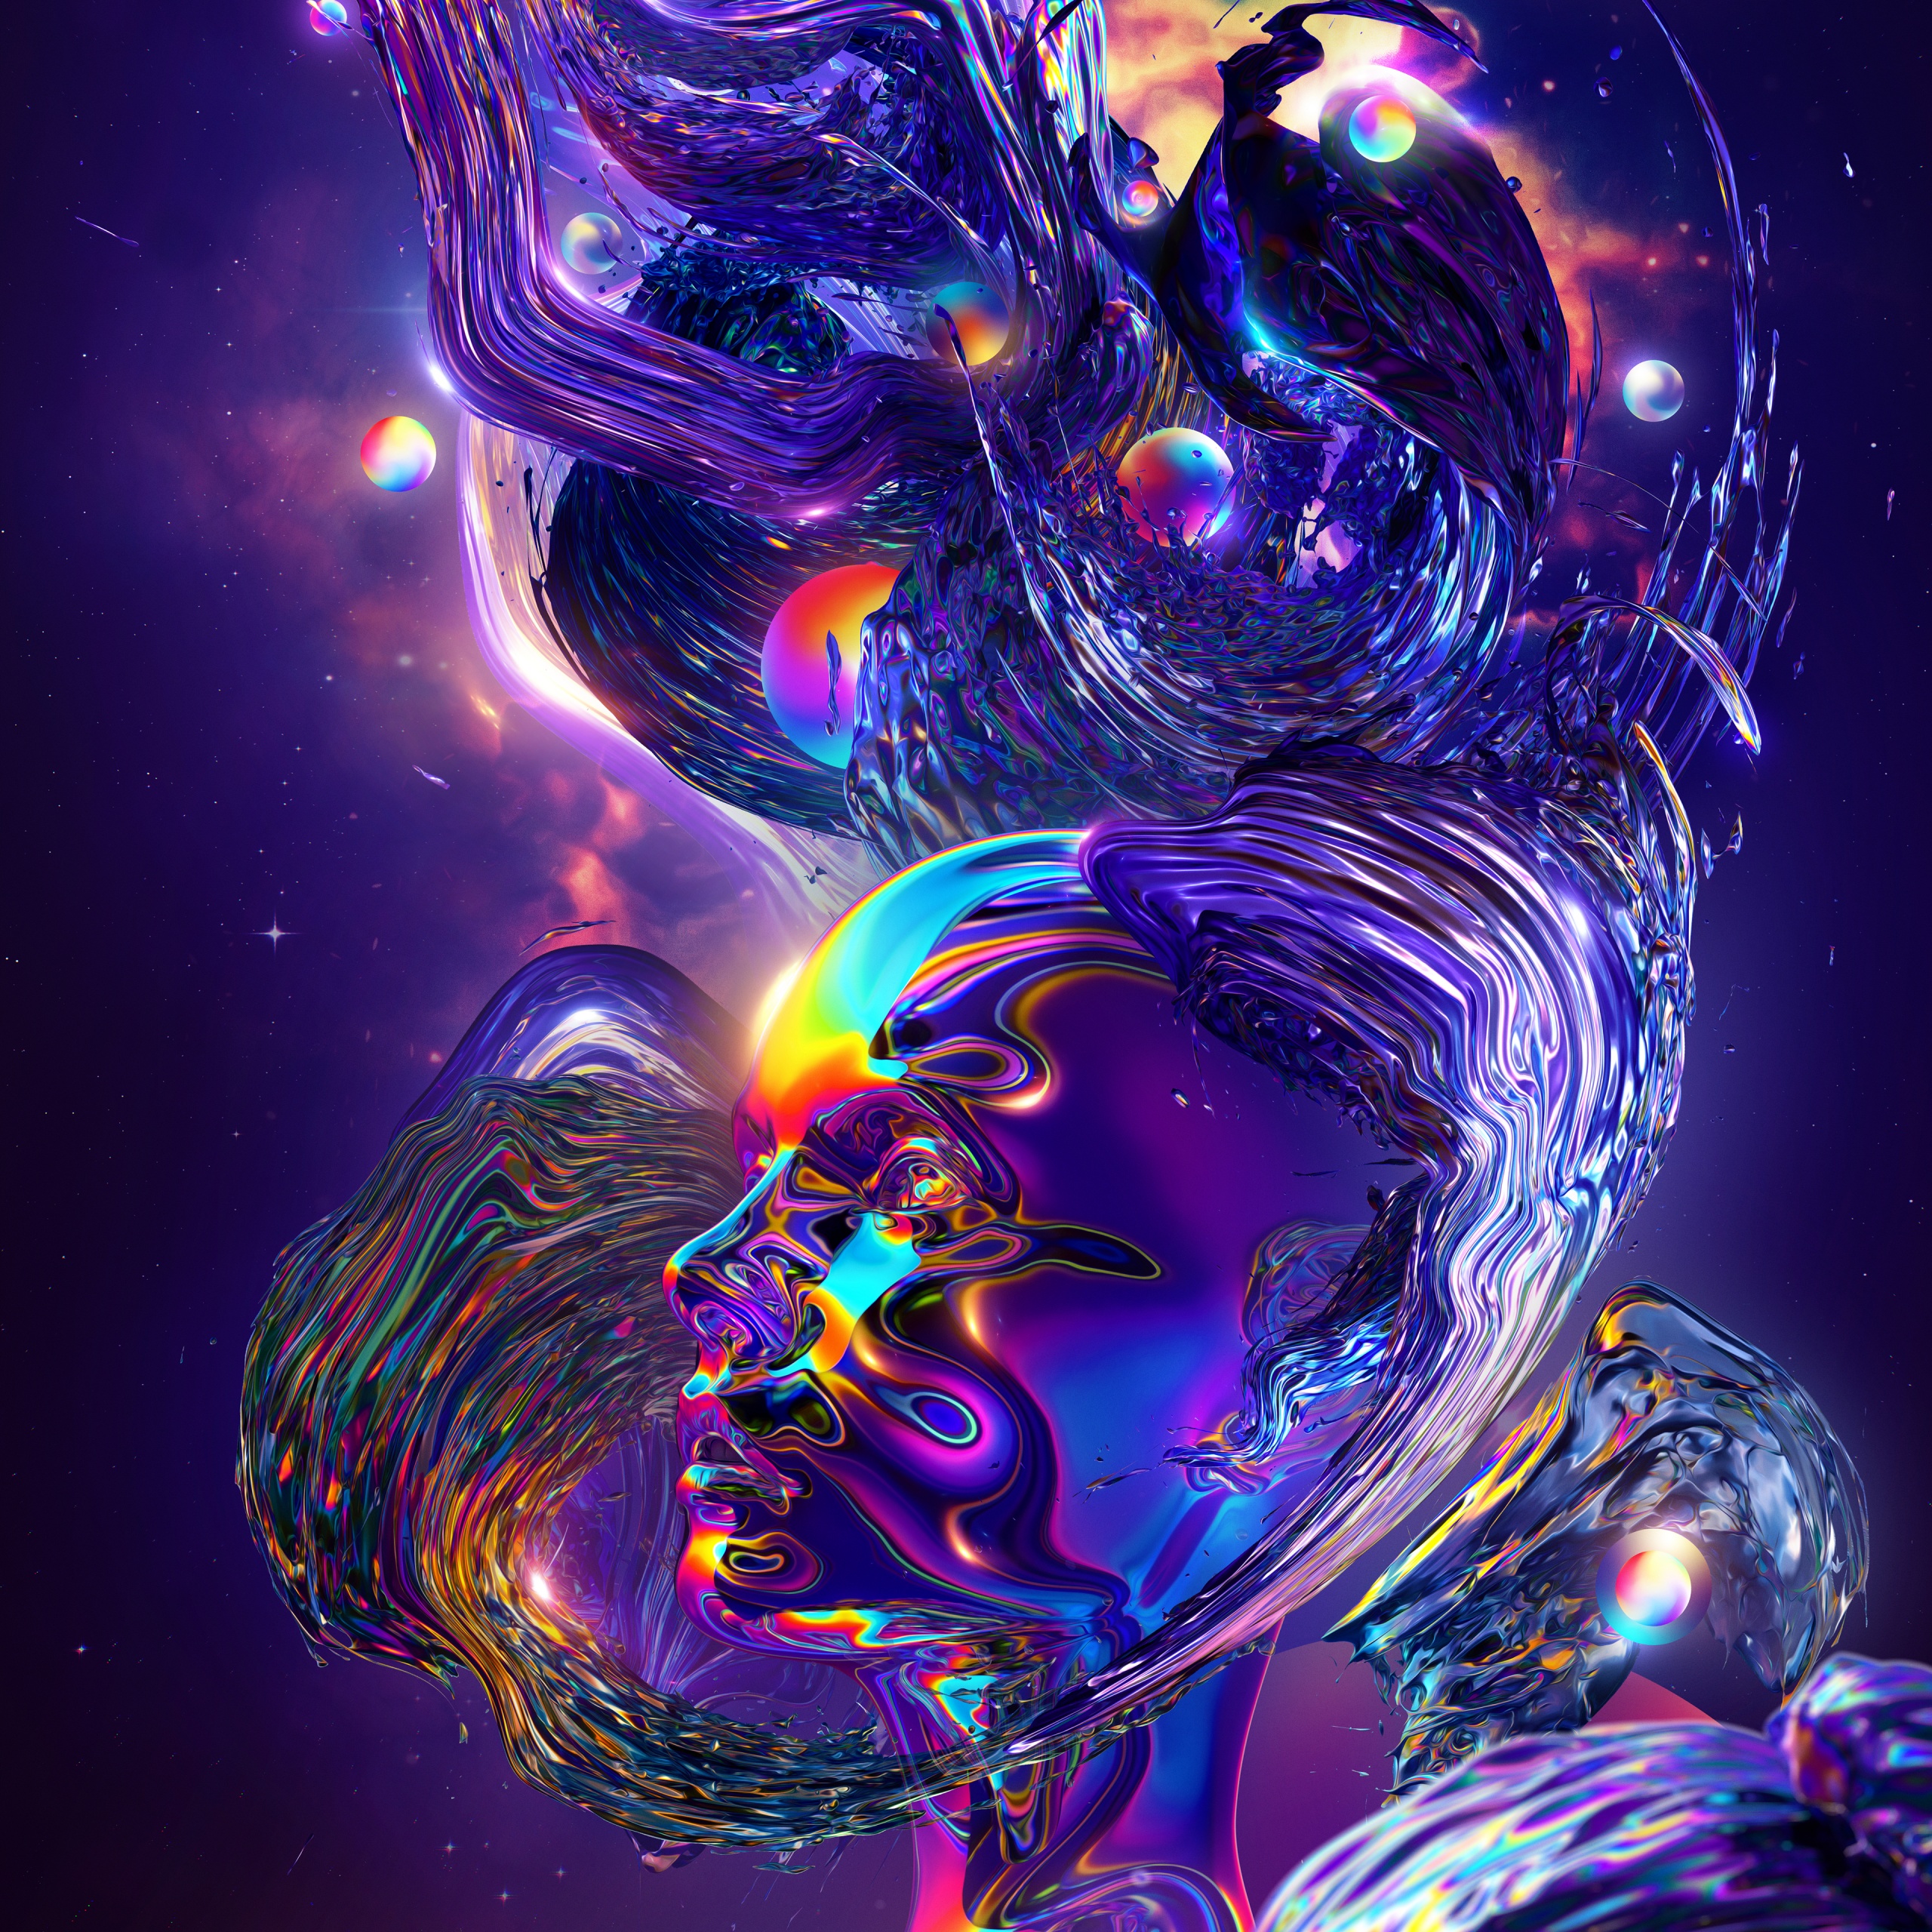 Woman Wallpaper 4K, Dream, Space, Psychedelic, Rainbow, Colorful, Fantasy